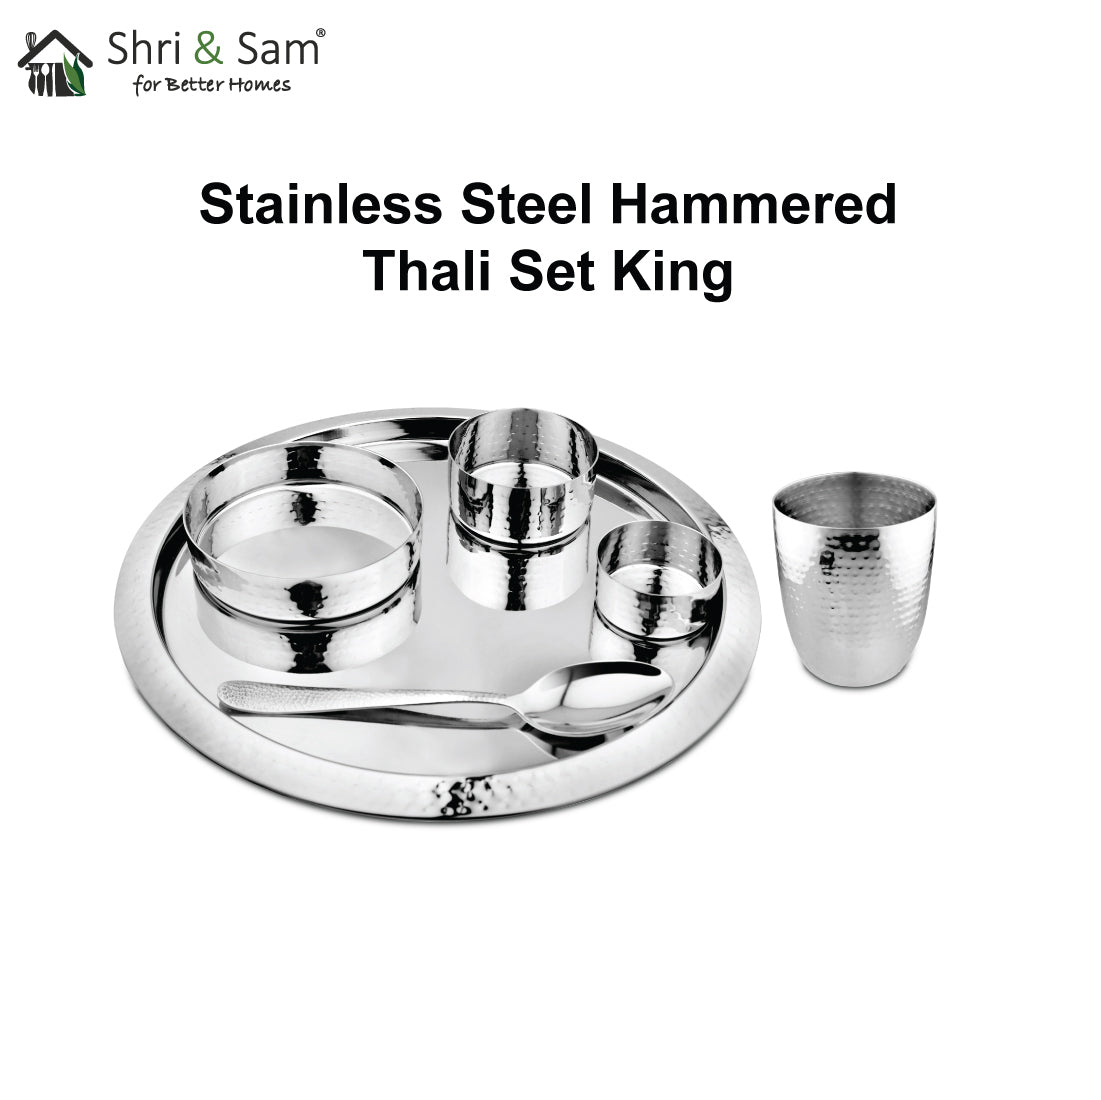 Stainless Steel Hammered Thali Set King